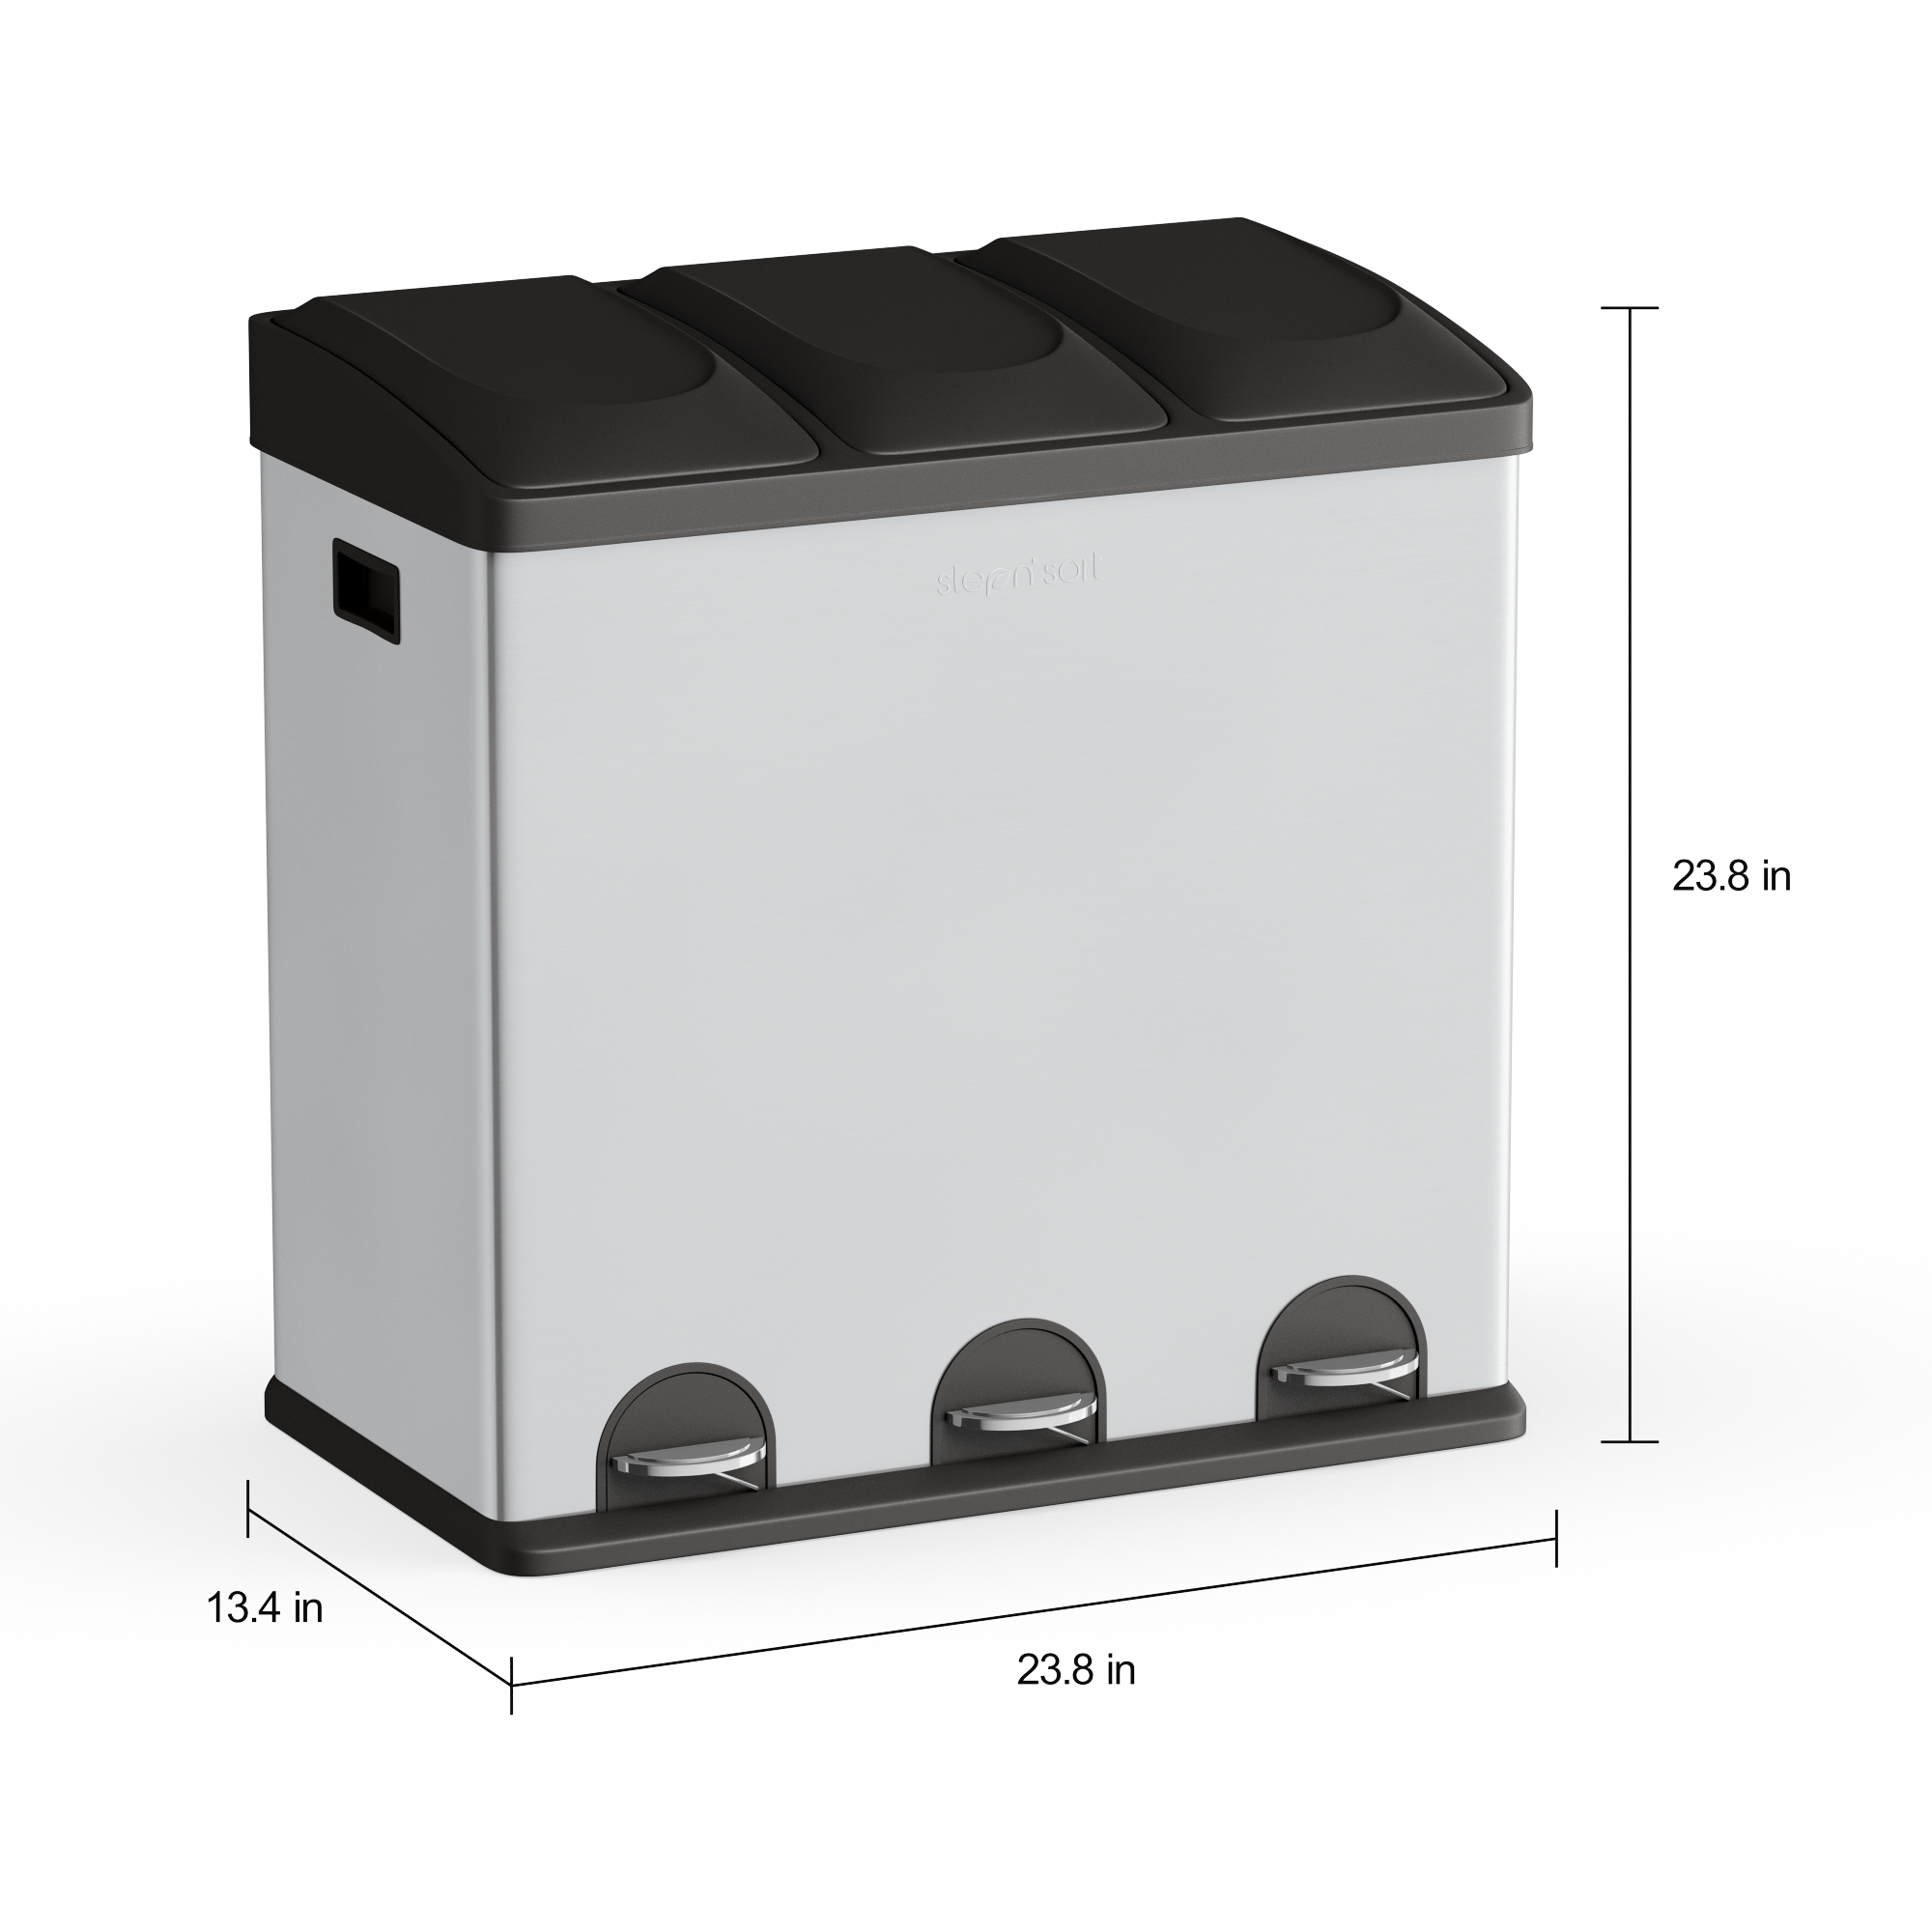 Step N' Sort 3-Compartment Stainless Steel Kitchen Trash and Recycling Bin, 16 gal - image 3 of 15